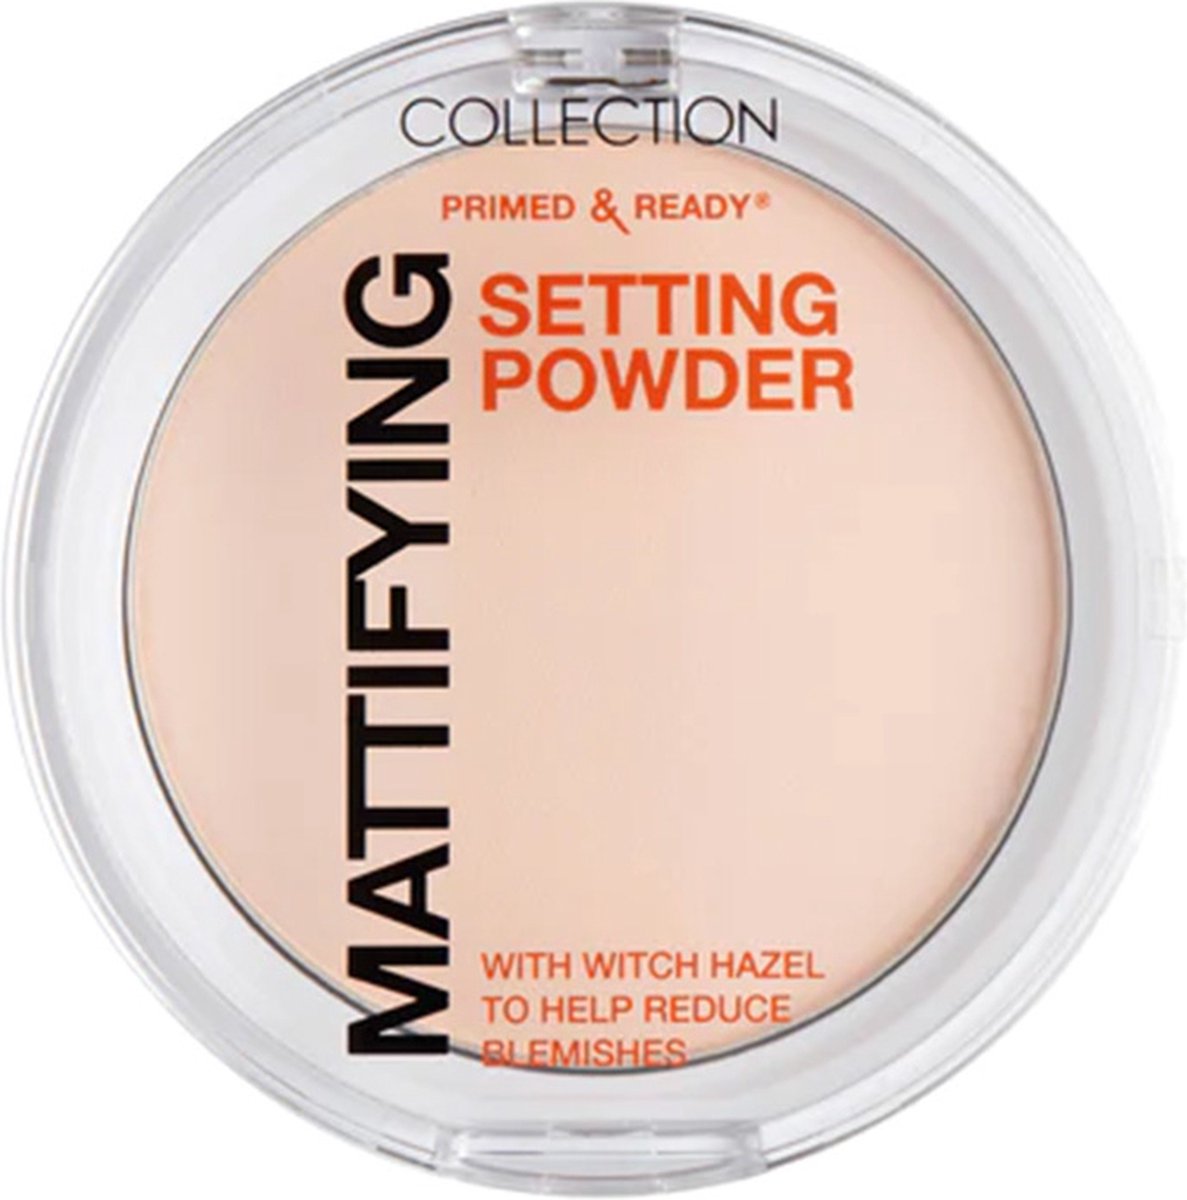 Collection Foundation Primed and Ready Mattifying Setting Powder - Loose Powder - Concealer - Voor een stralende gloed